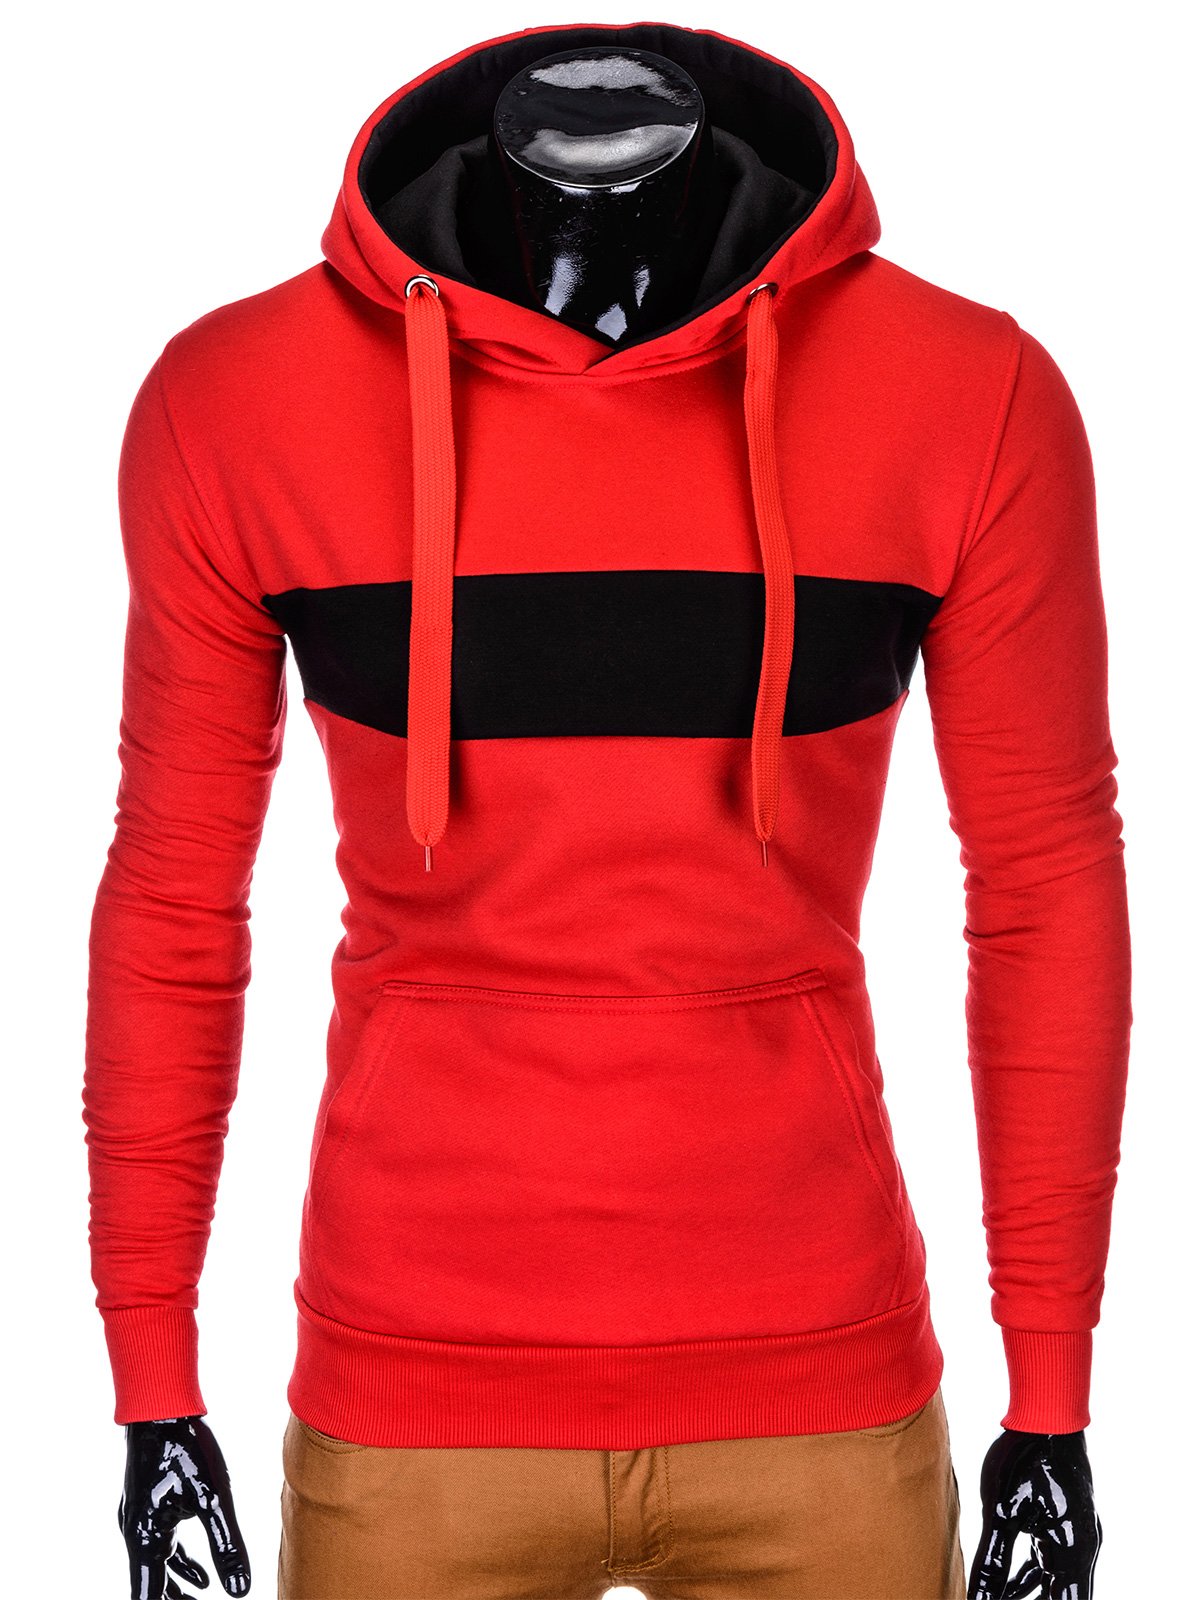 Men's hoodie B814 - red | MODONE wholesale - Clothing For Men